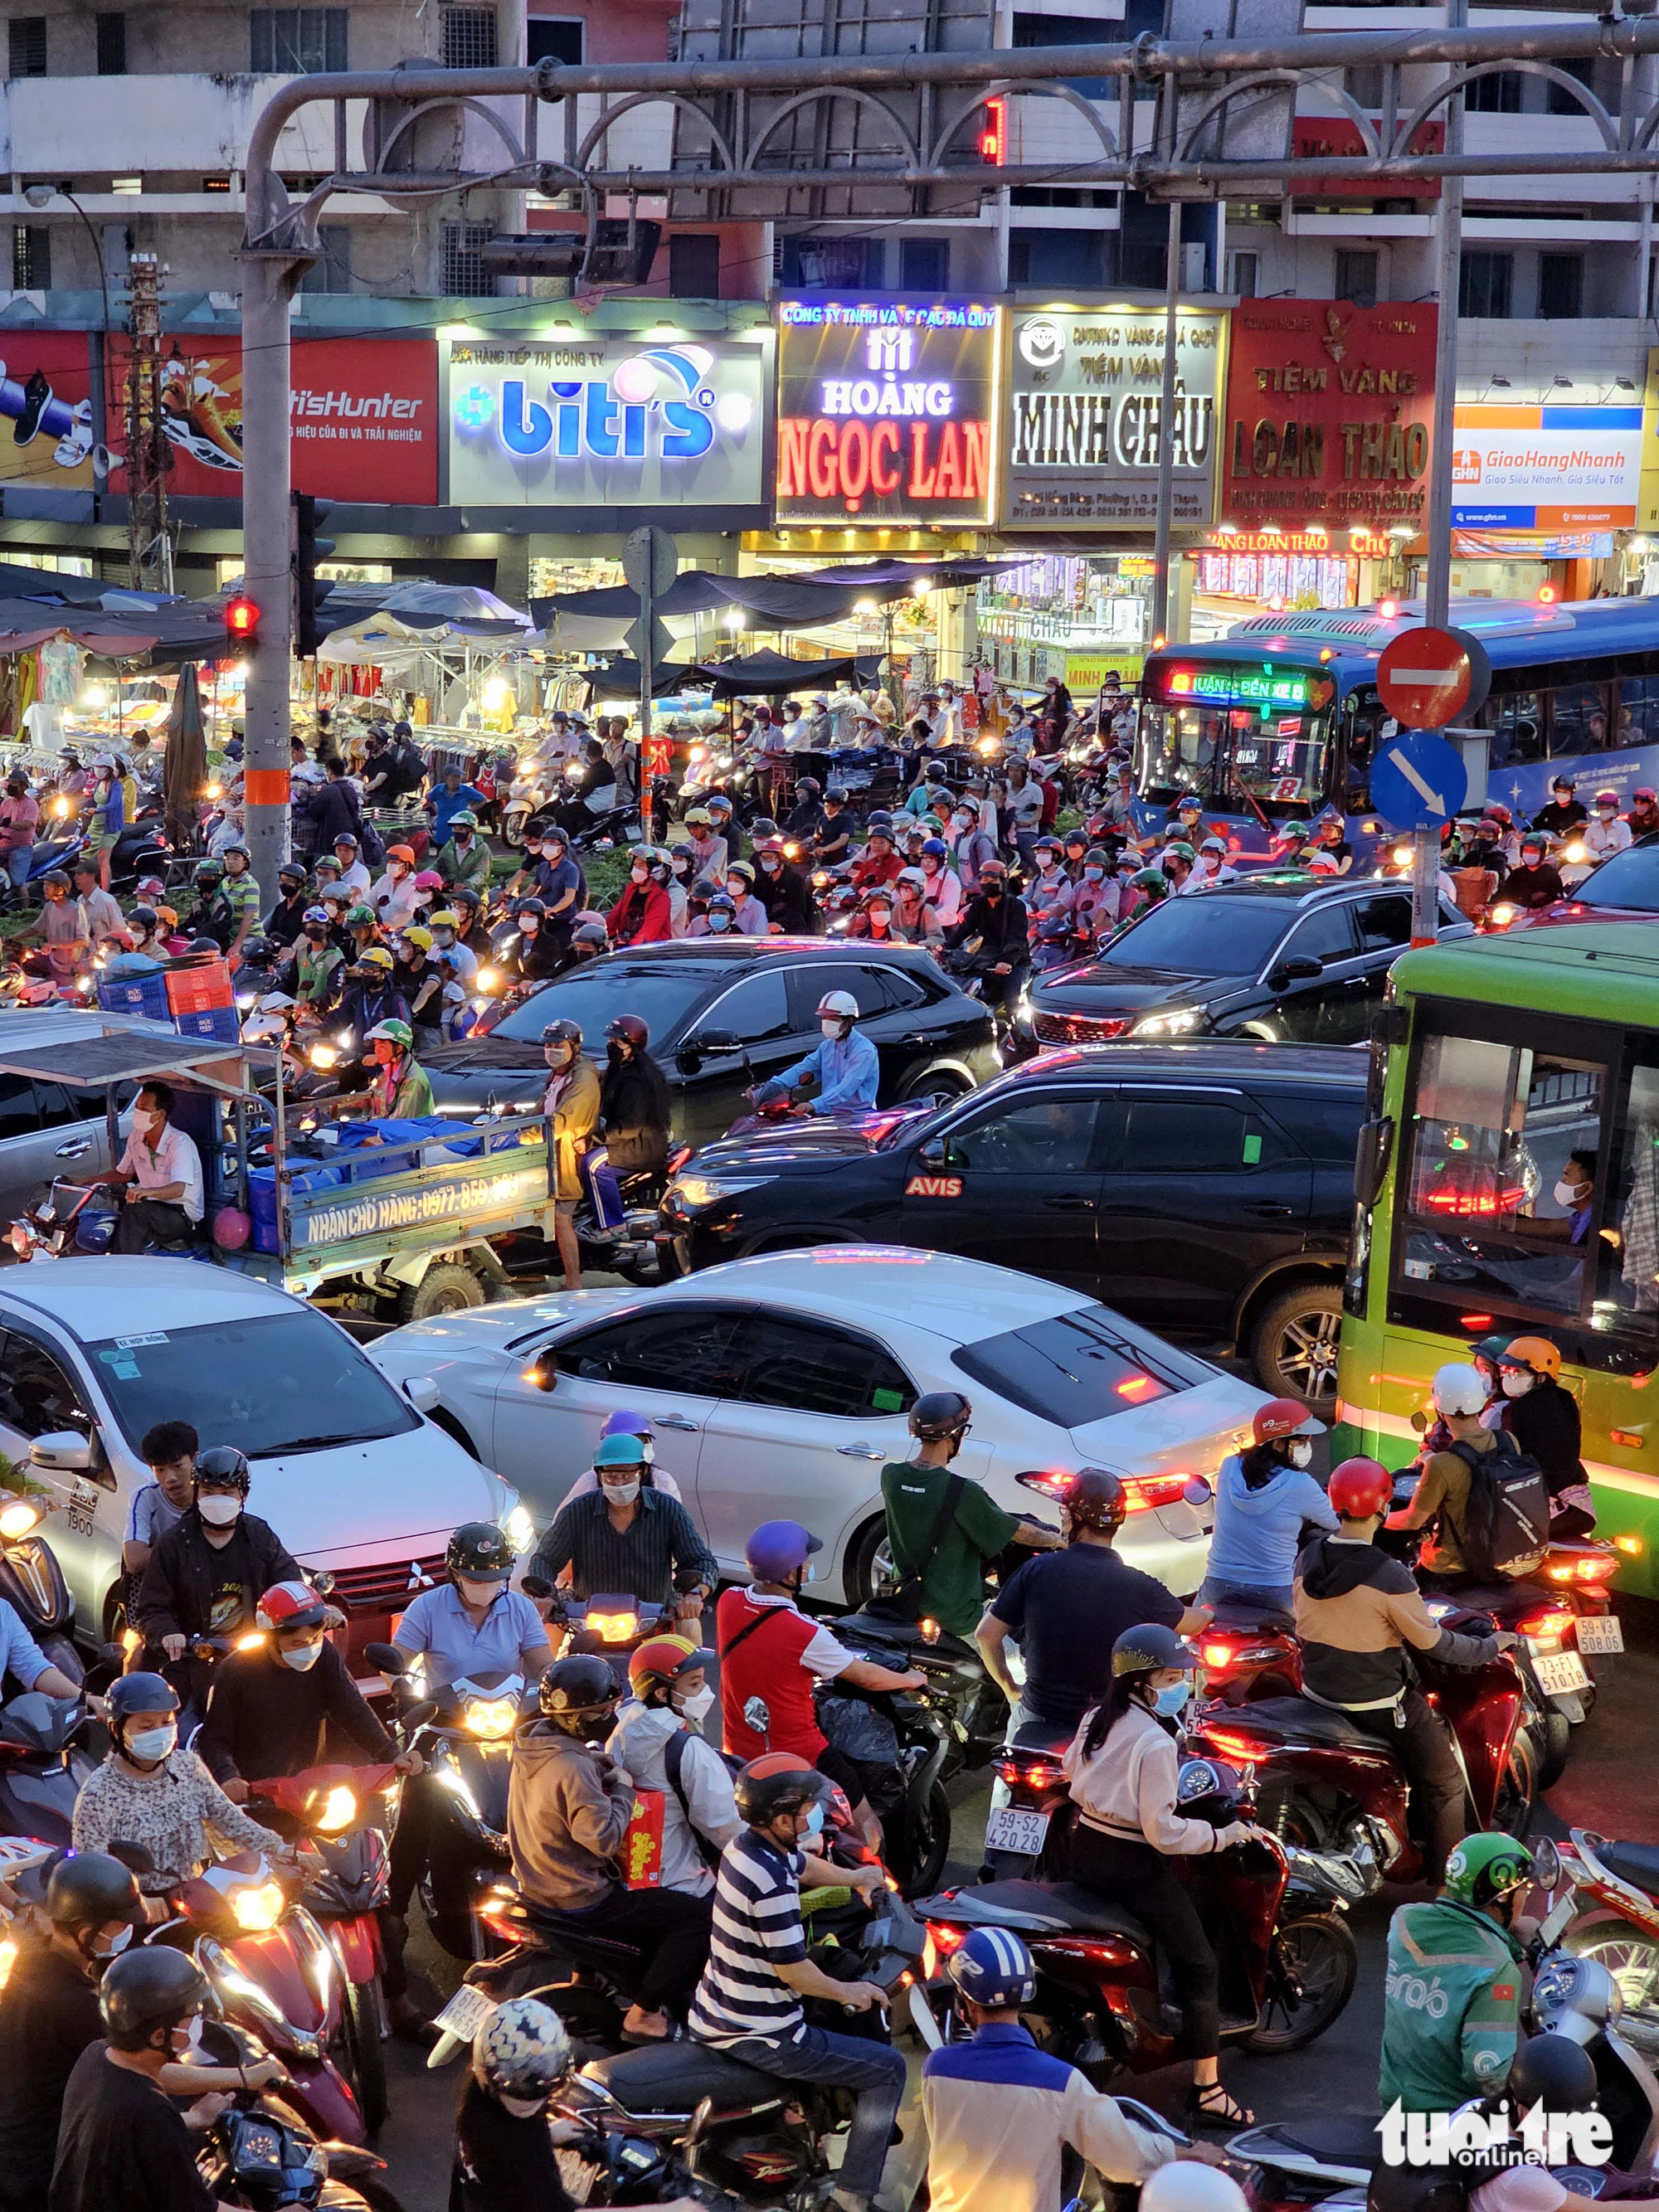 Traffic is in a state of chaos in front of Ba Chieu Market in Binh Thanh District, Ho Chi Minh City, May 12, 2023. Photo: Hieu Giang / Tuoi Tre